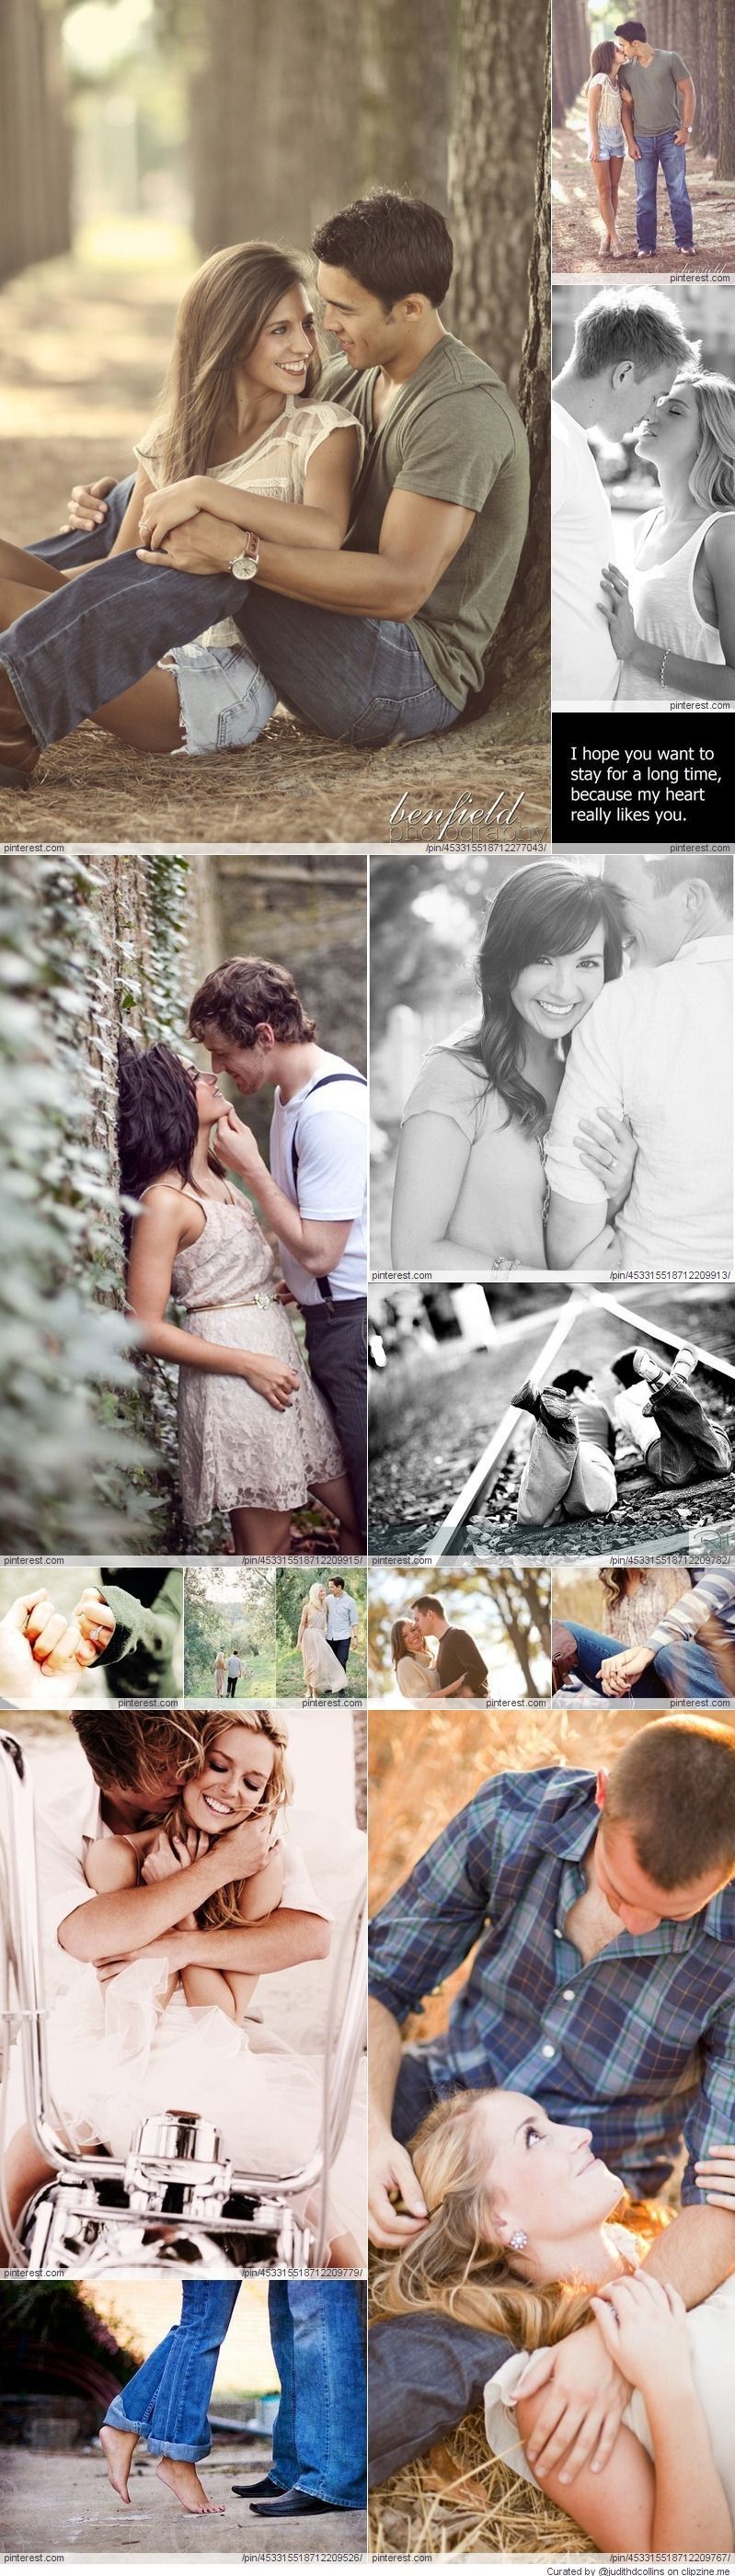 Engagement Photography:soooo cute @brianderson467 these are some great outfit ideas too! just like the contrast!